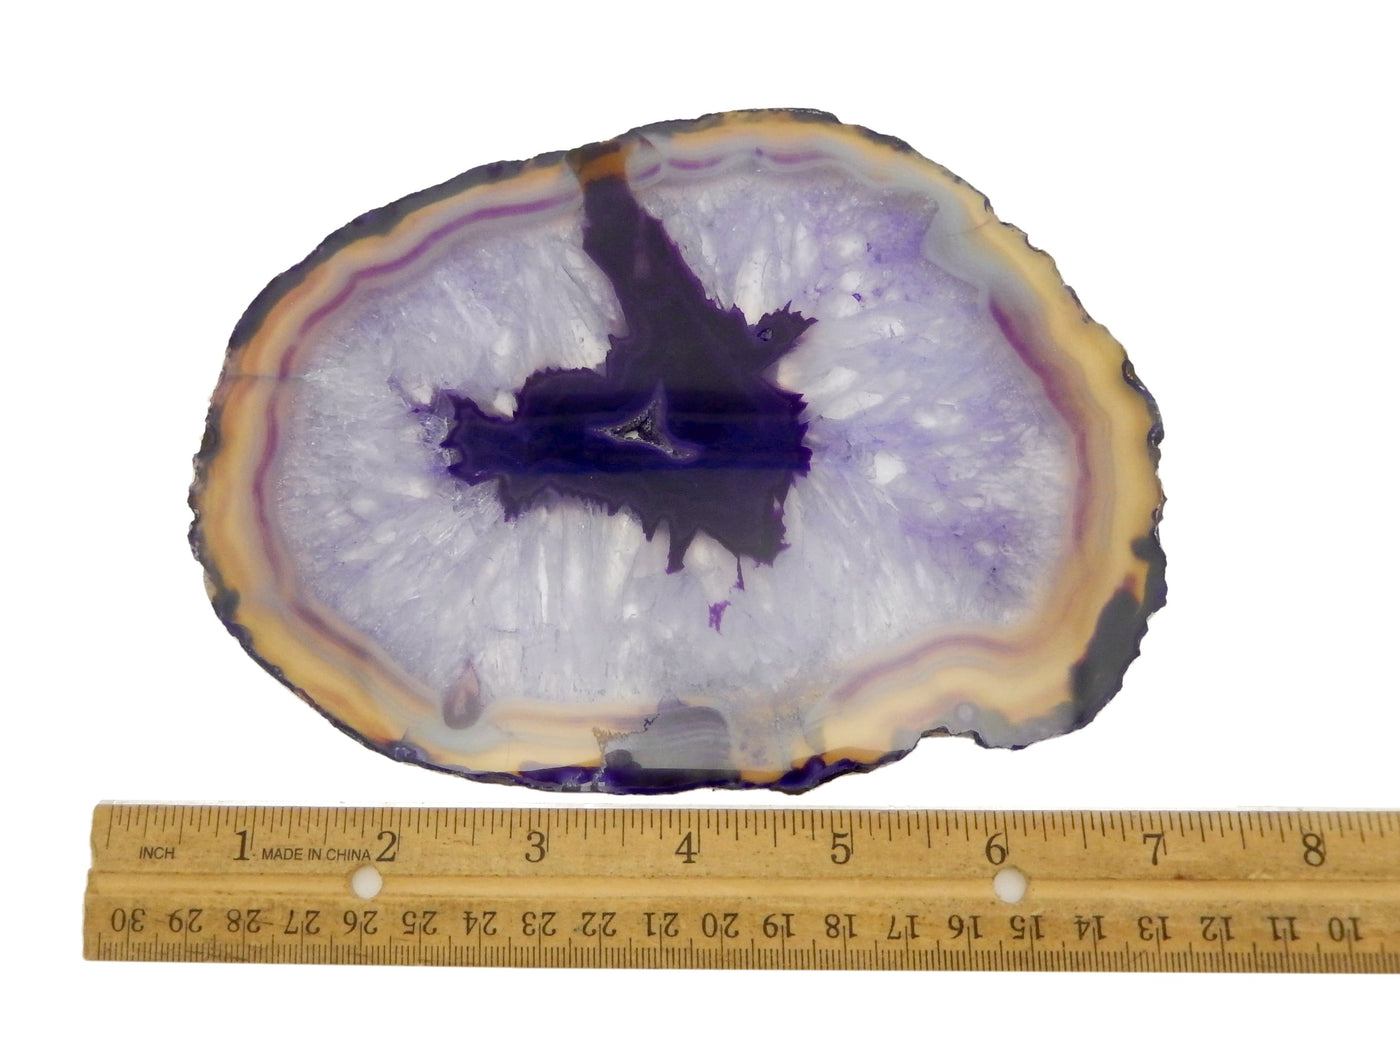 3 Purple Agate Slices #7 next to a ruler for size reference